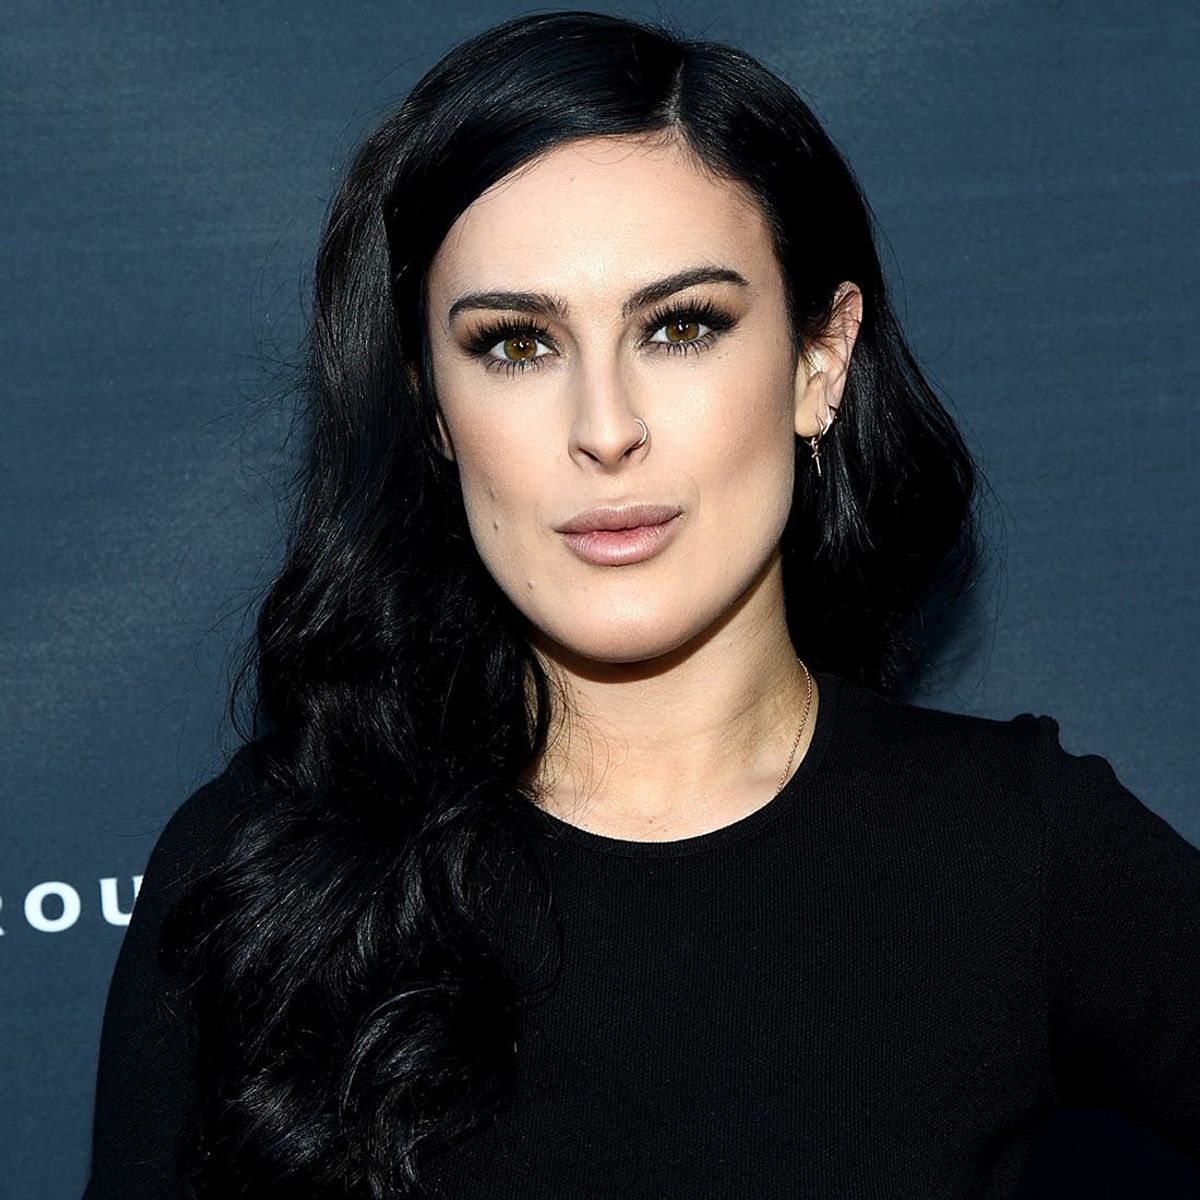 Rumer Willis Is the Latest Celebrity to Copy Ruby Rose’s Haircut